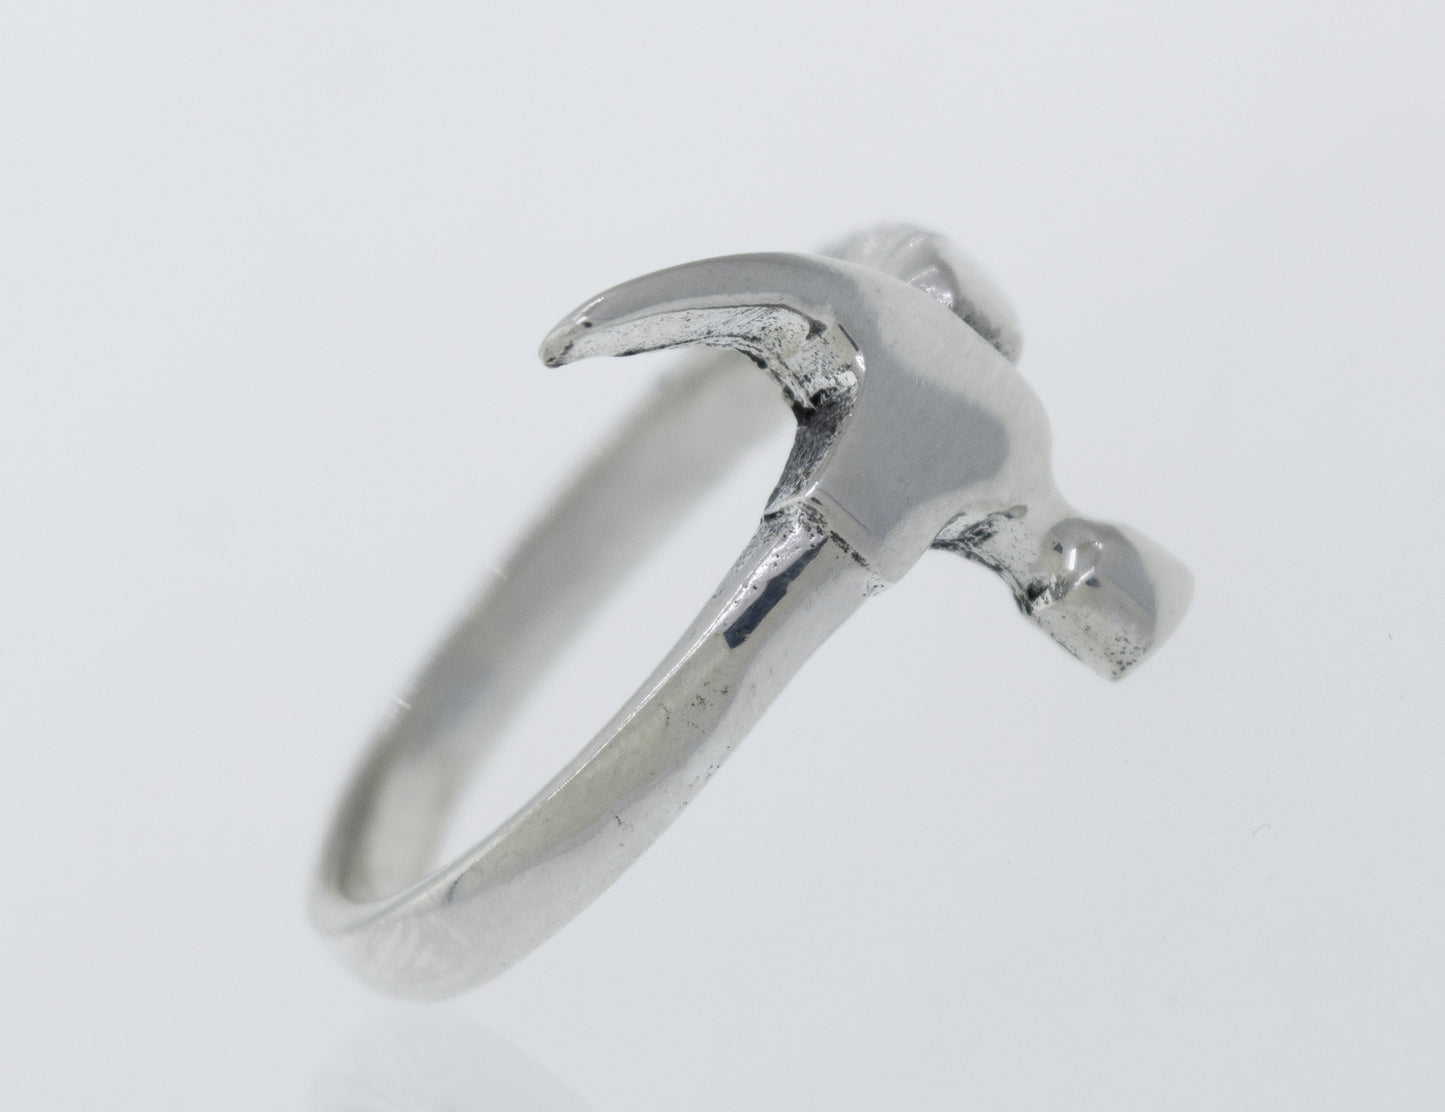 A Super Silver hammer ring on a white surface.